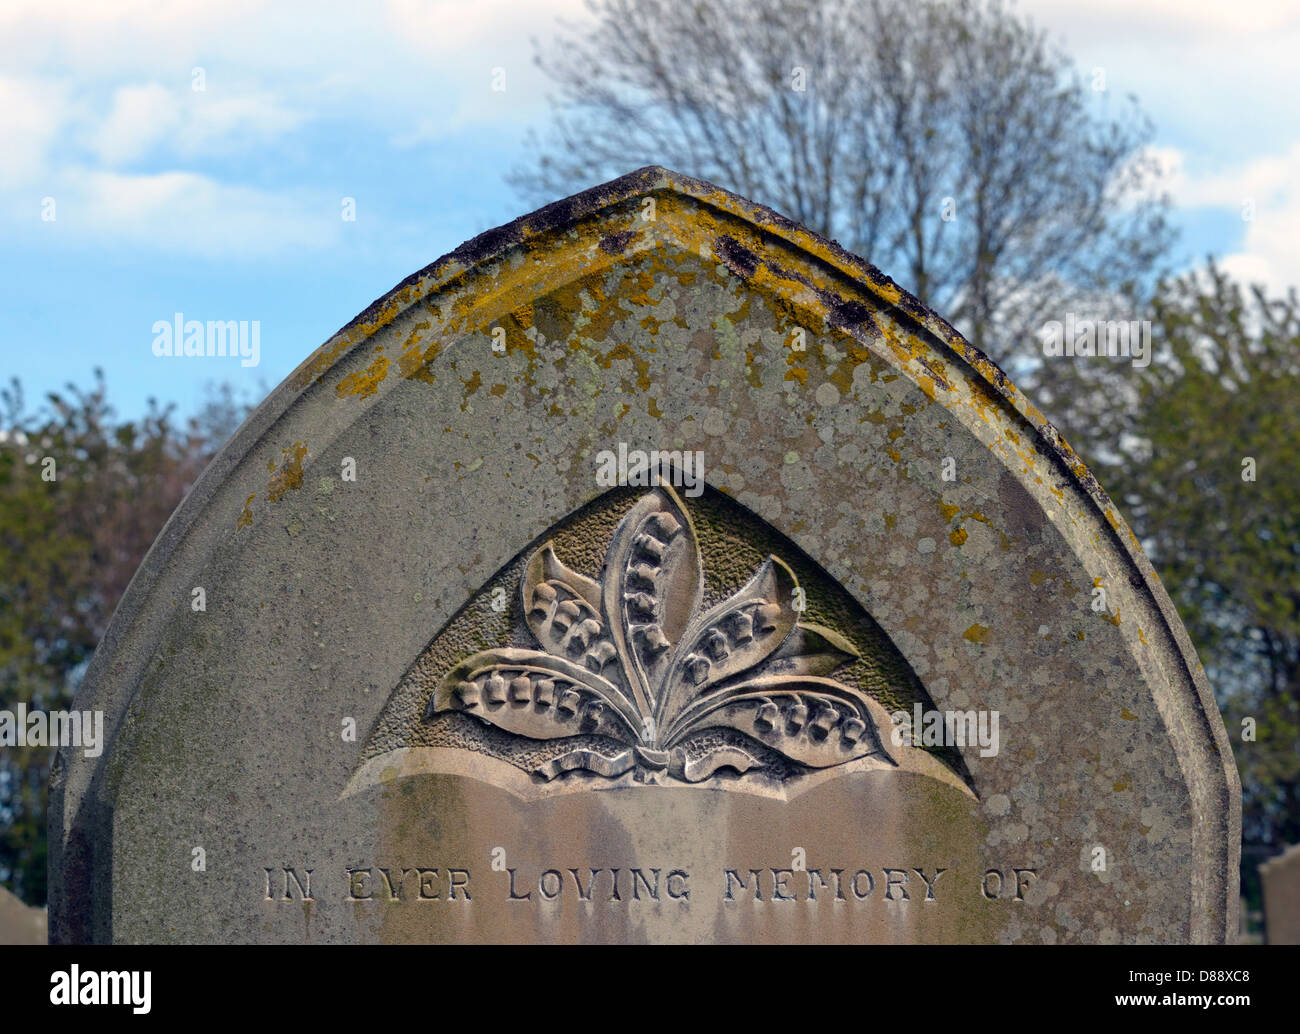 Gravestone with lilies design. Church of All Saints. Frostenden, Suffolk, England, United Kingdom, Europe. Stock Photo